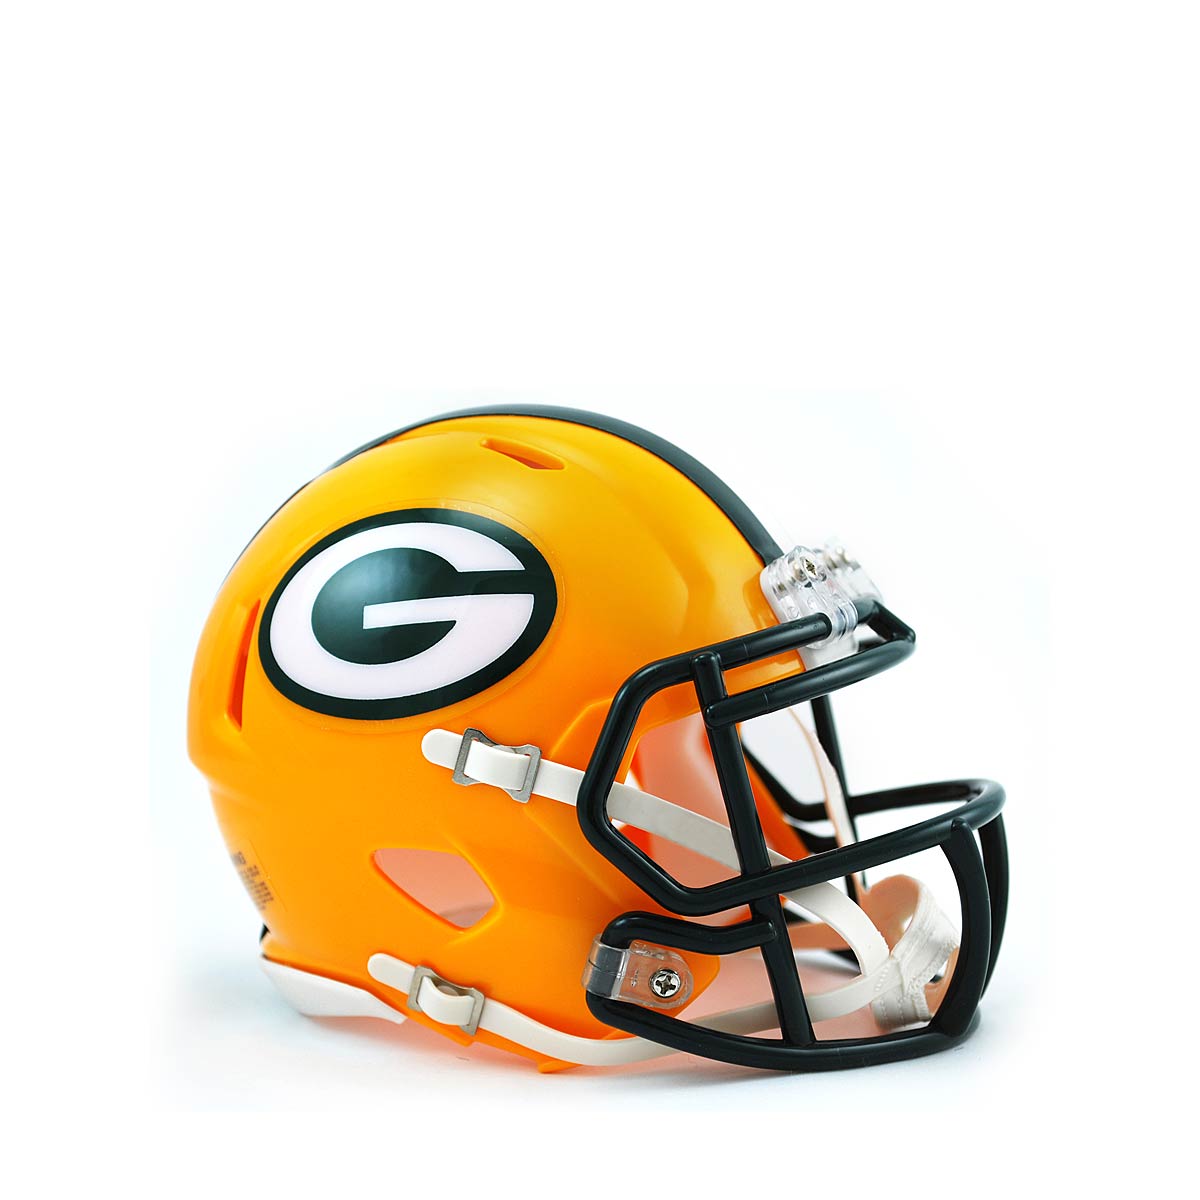 Riddell Nfl Mini Helm Speed Green Bay Packers, Yellow/Green